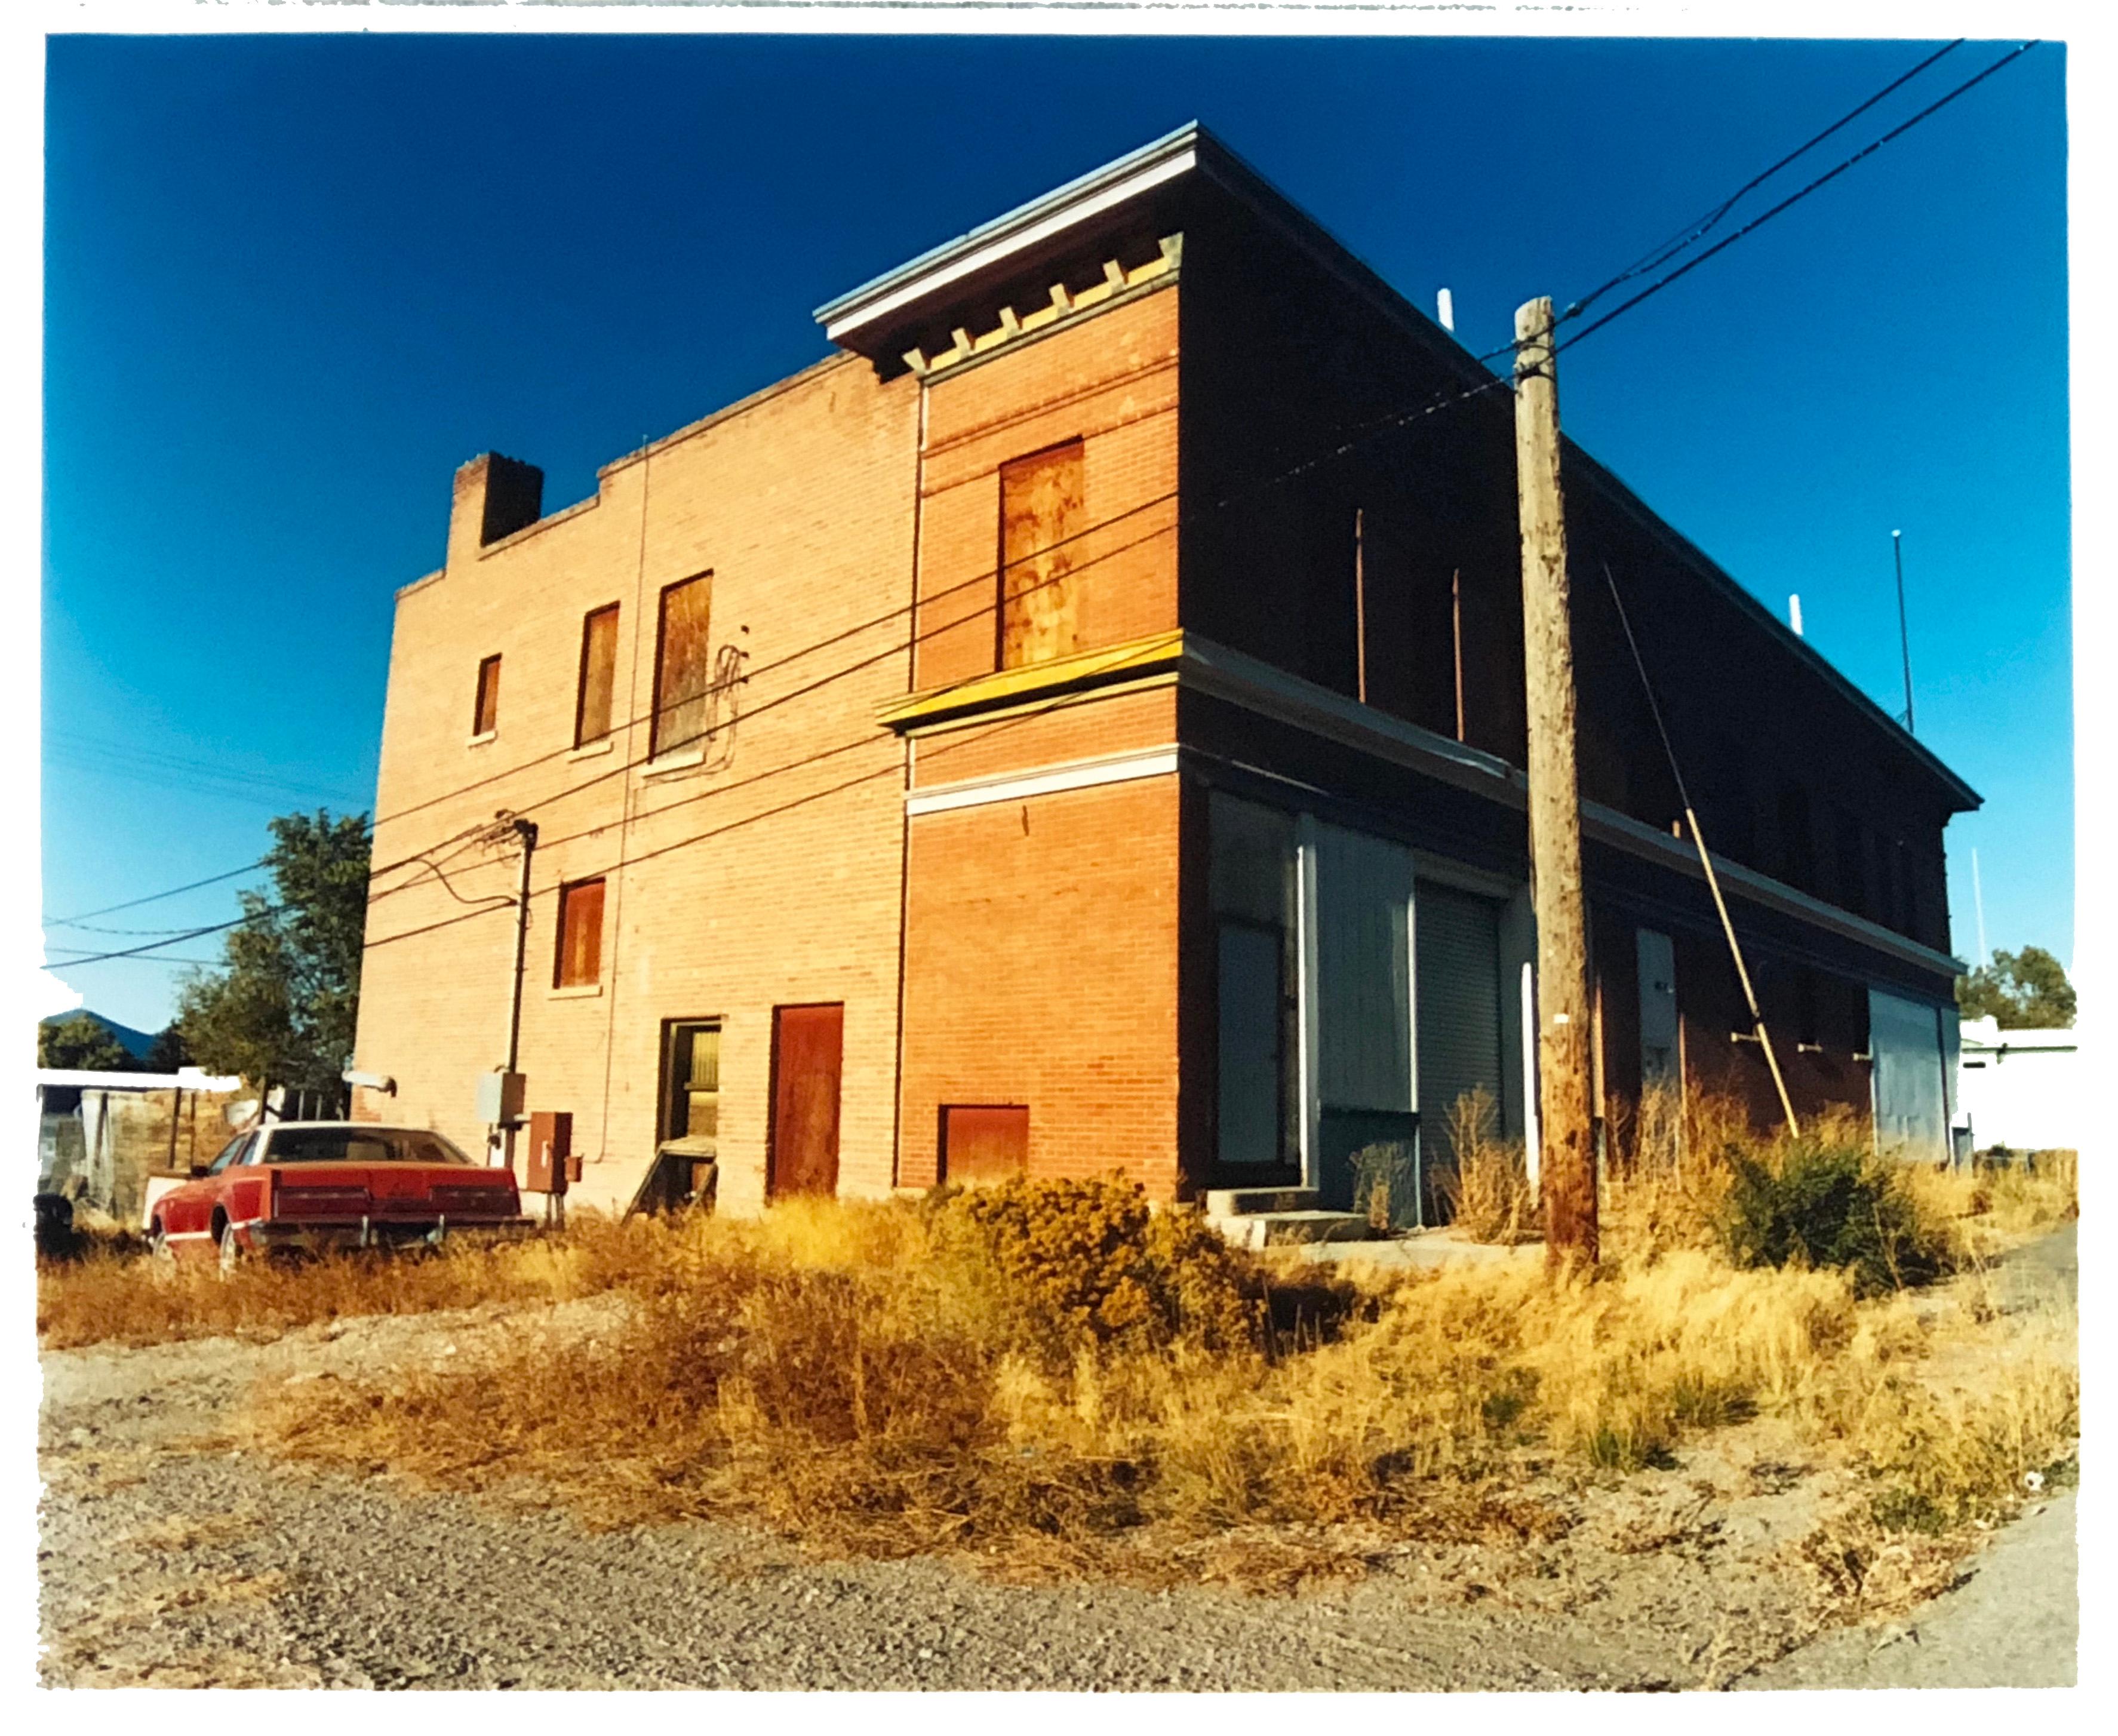 'High Street', Ely, Nevada - After the Gold Rush - Architecture Color Photo